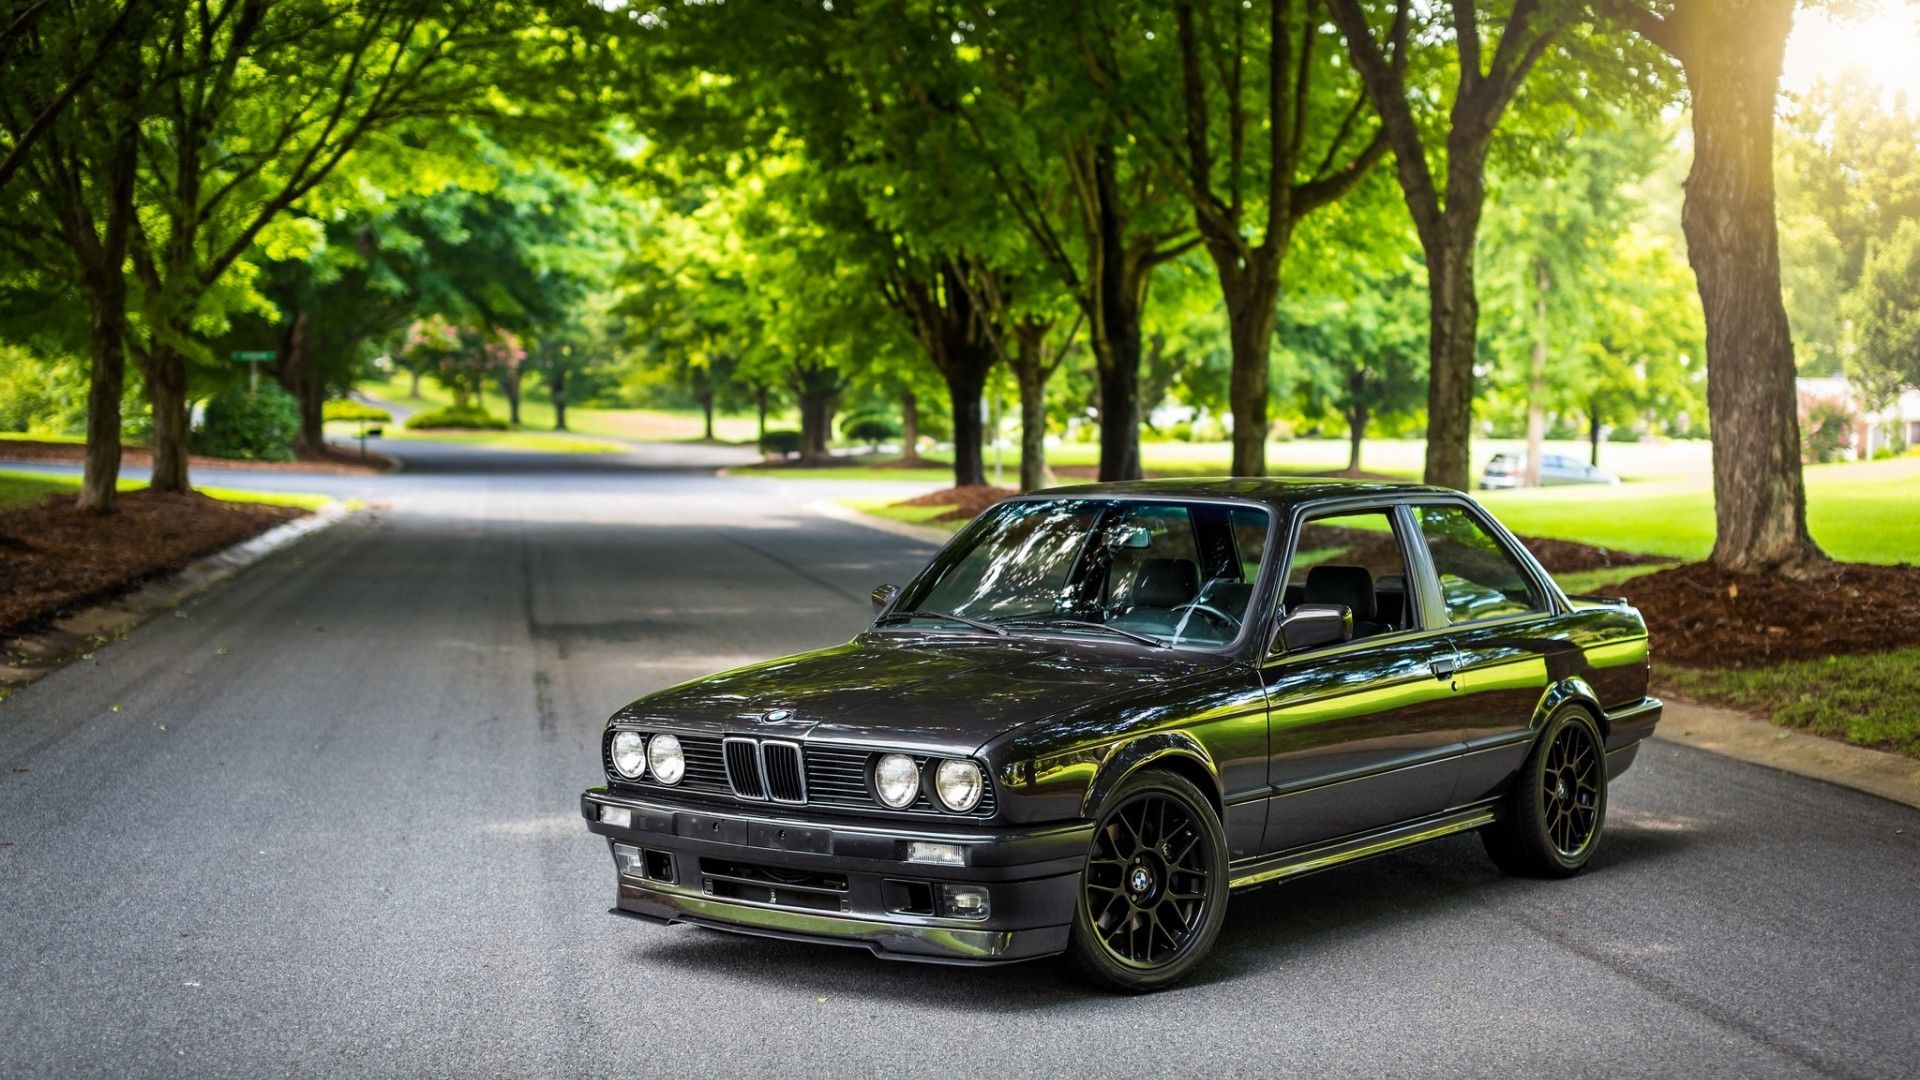 Tag 4k Ultra HD Bmw E30 Wallpaper Background And Pictures For